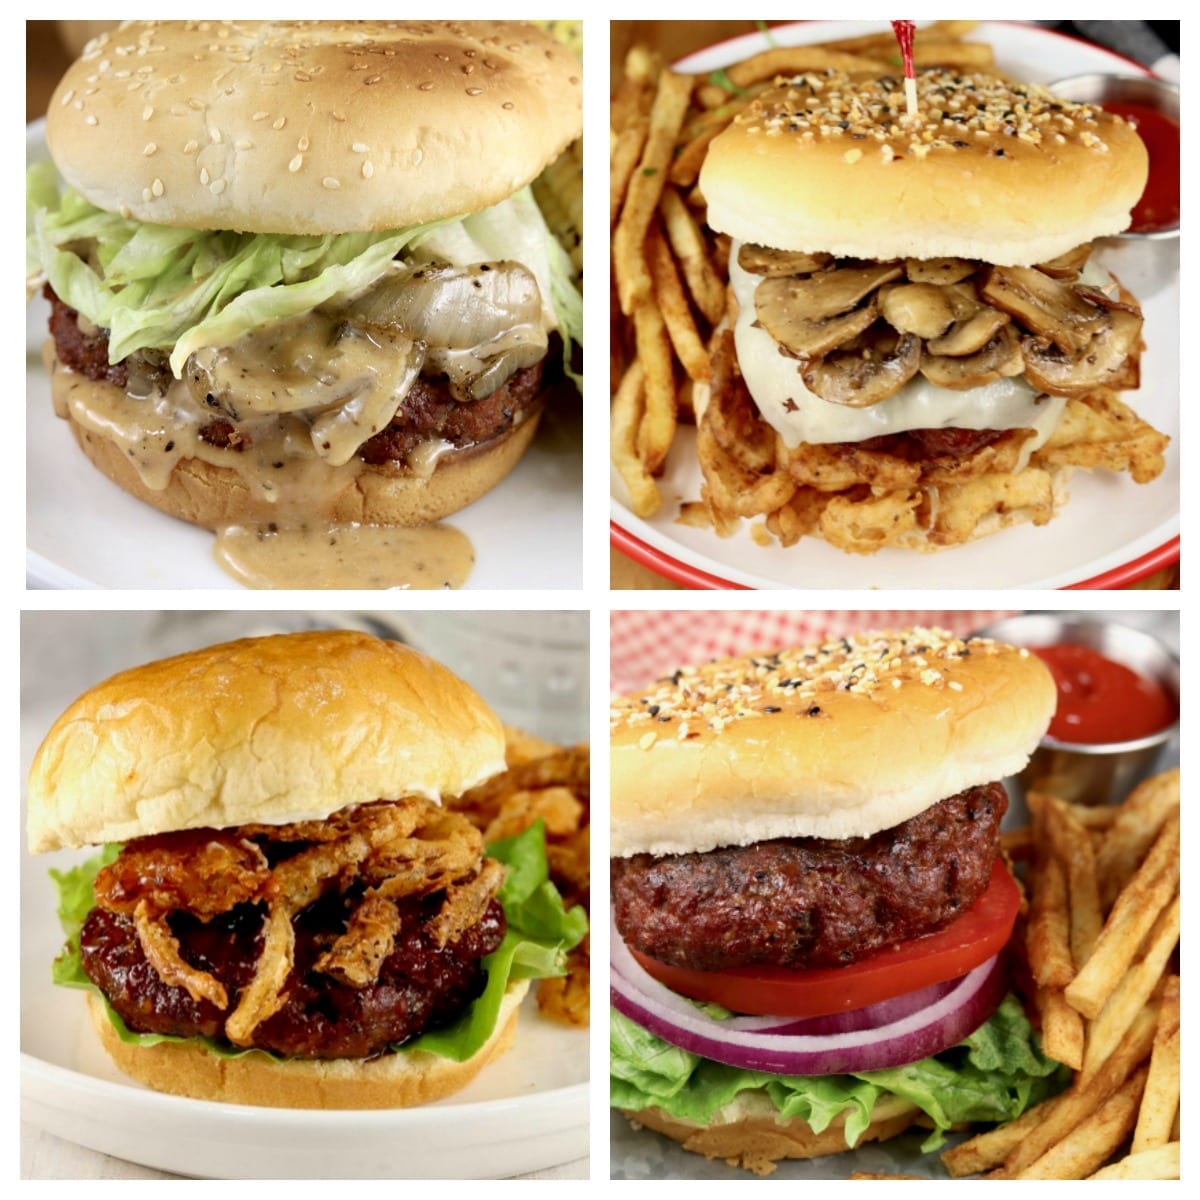 Collage of 4 grilled burgers